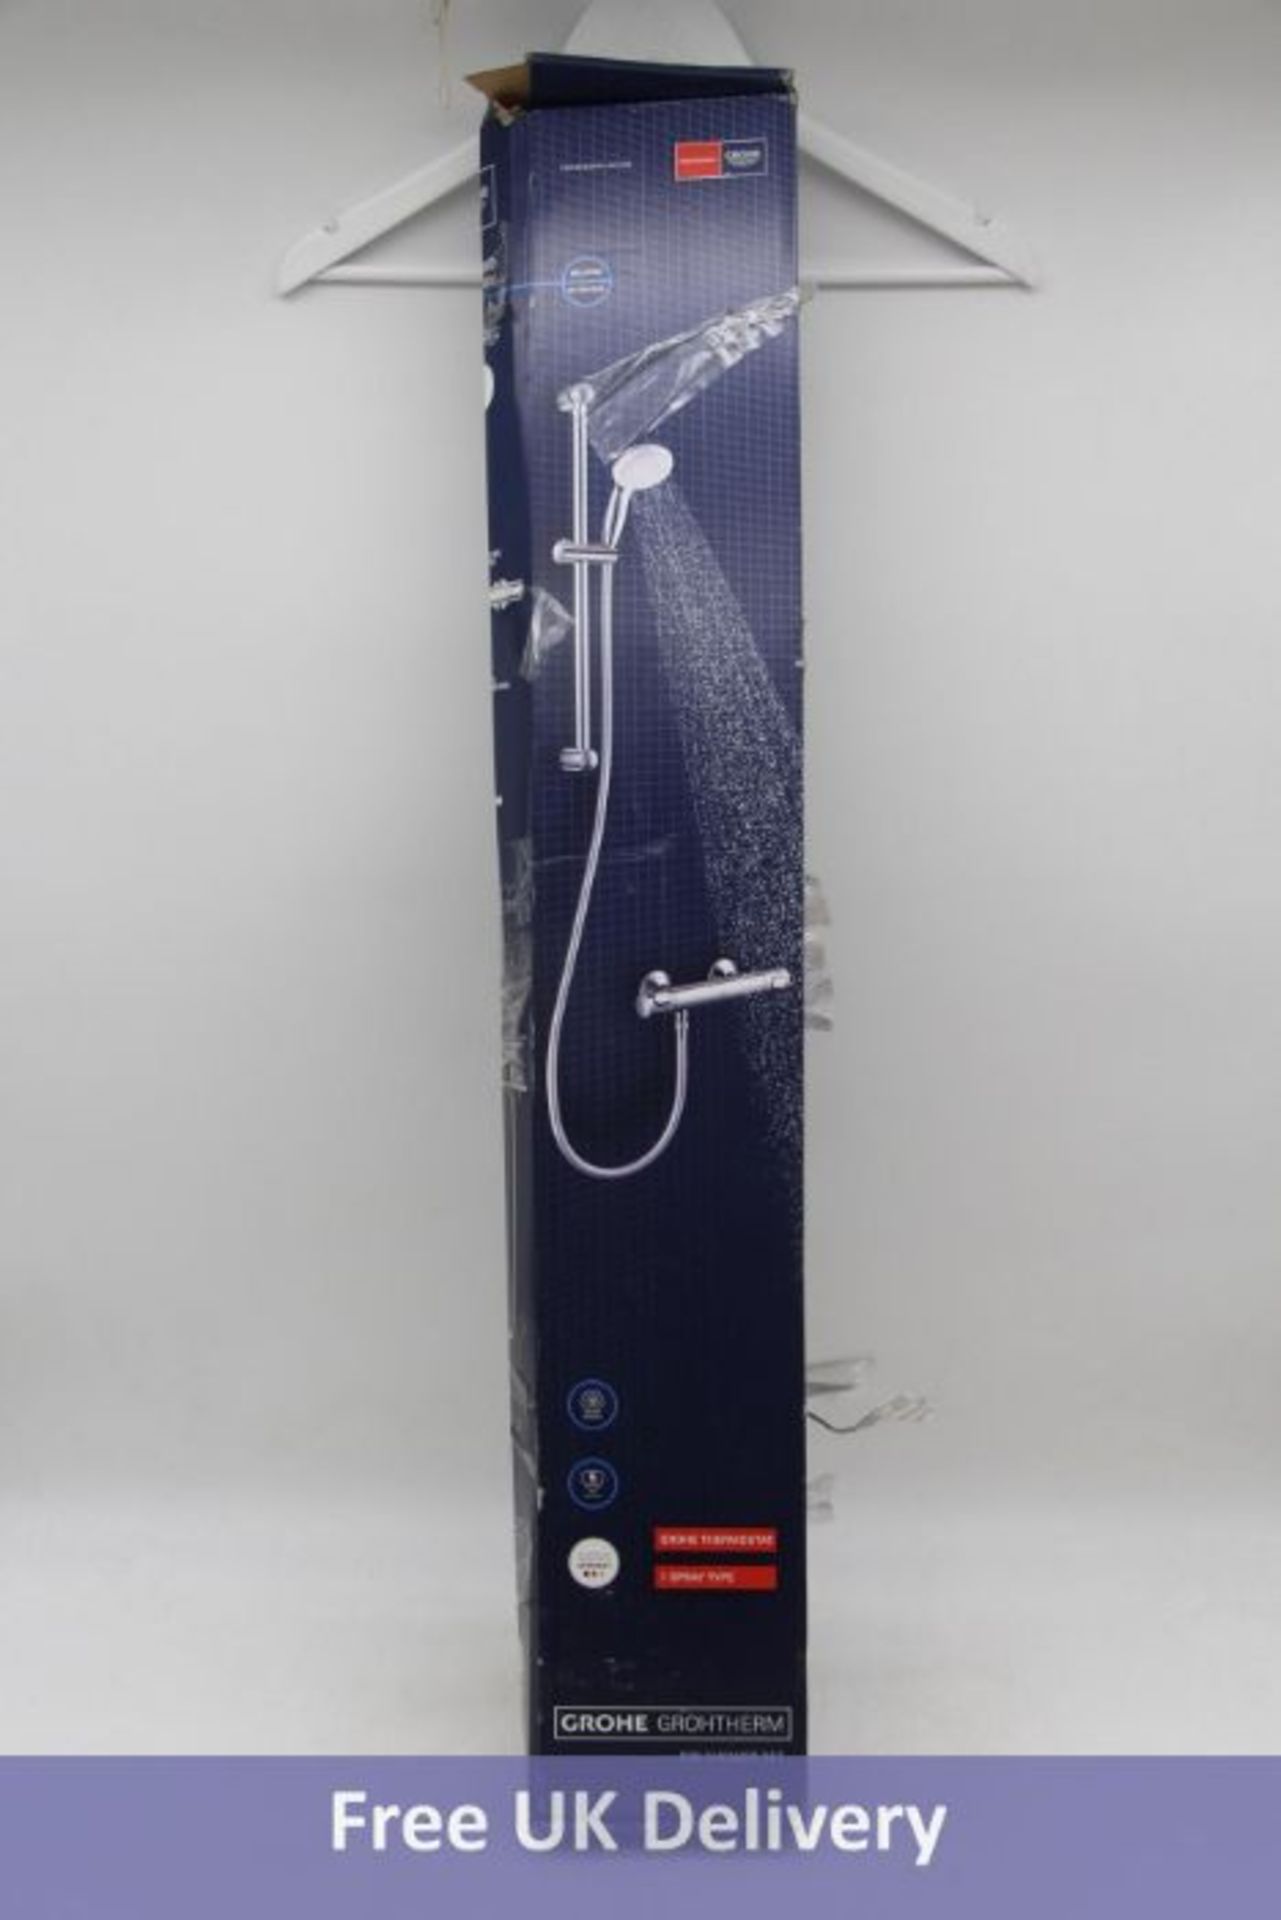 Grohe G5 Grohtherm 500 Thermostatic Bar Mixer Shower With Slide Rail Kit